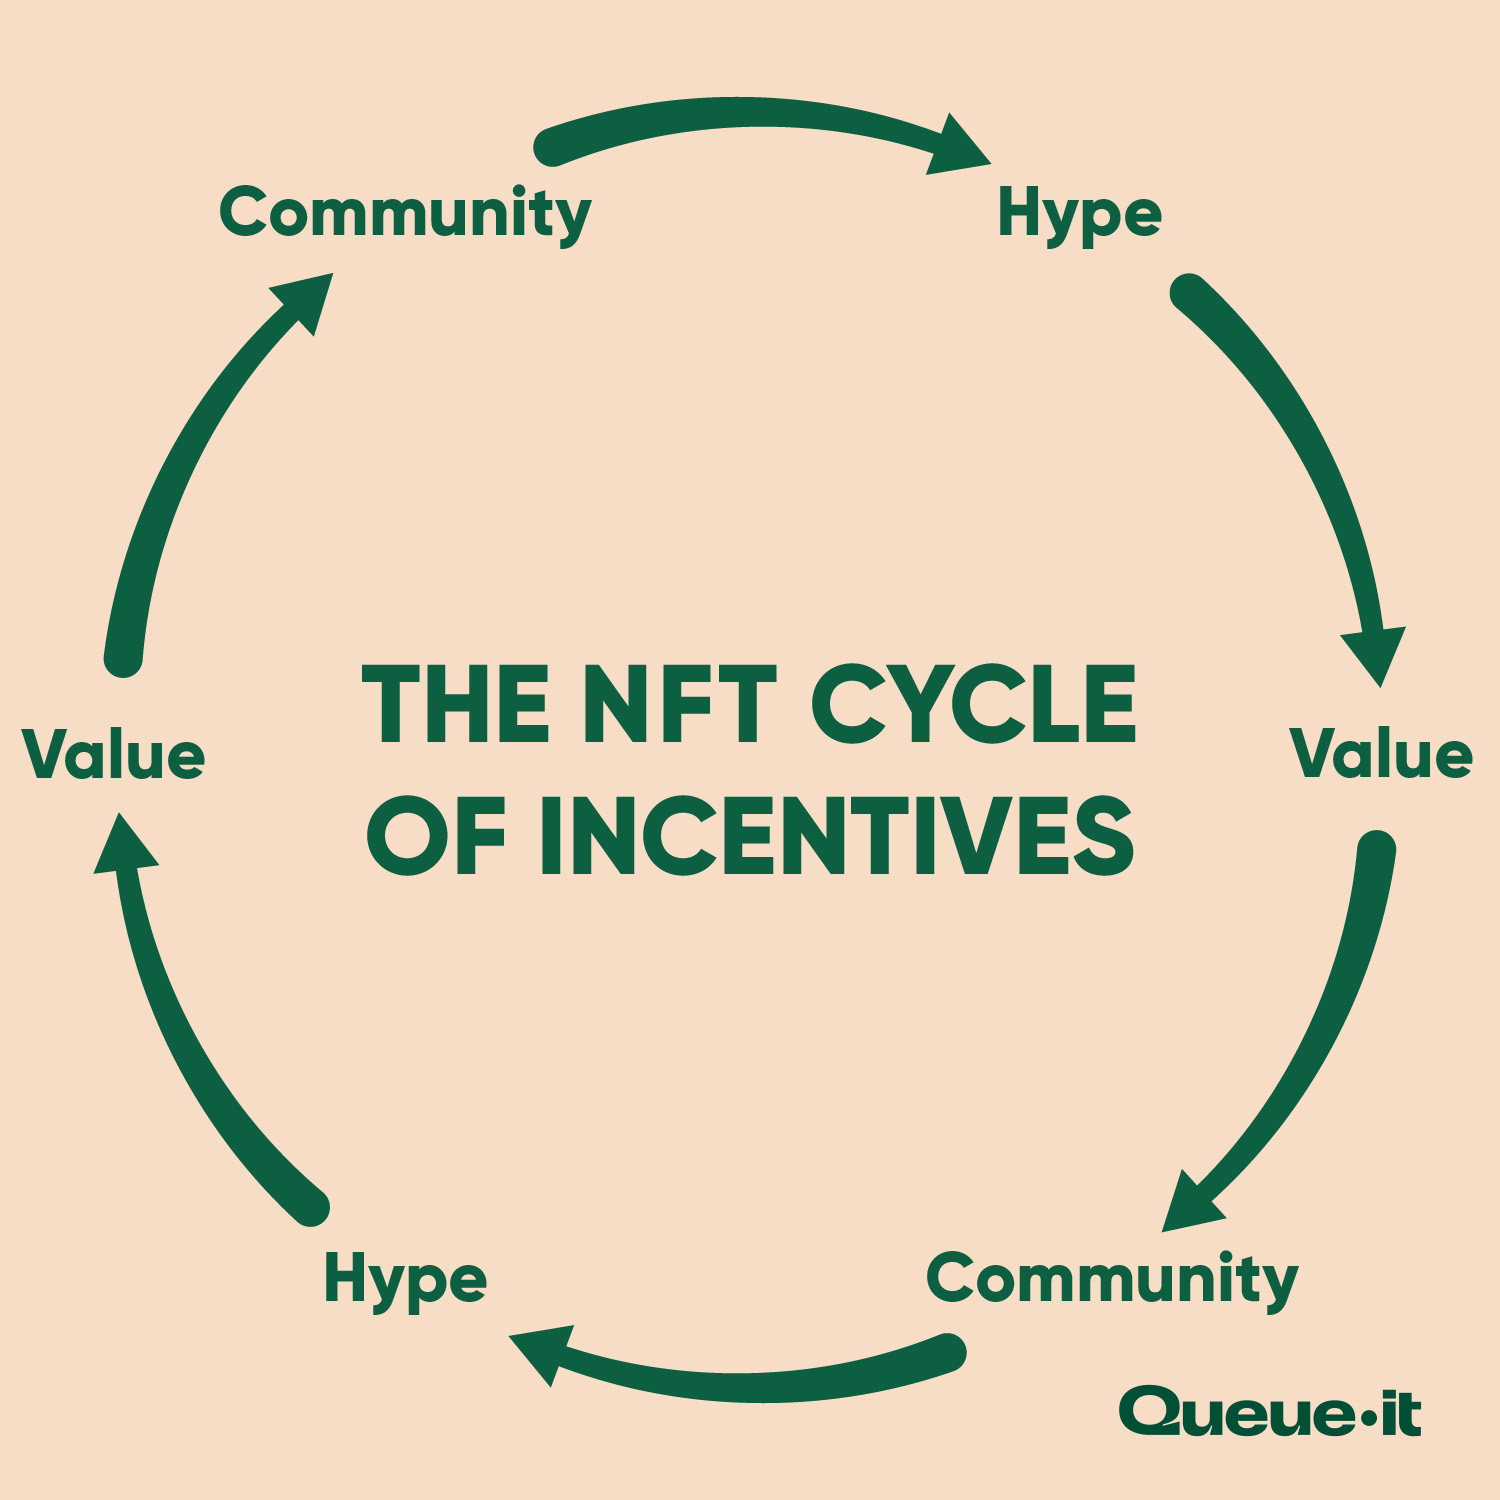 The NFT Cycle of Incentives. From community to hype to value back to community